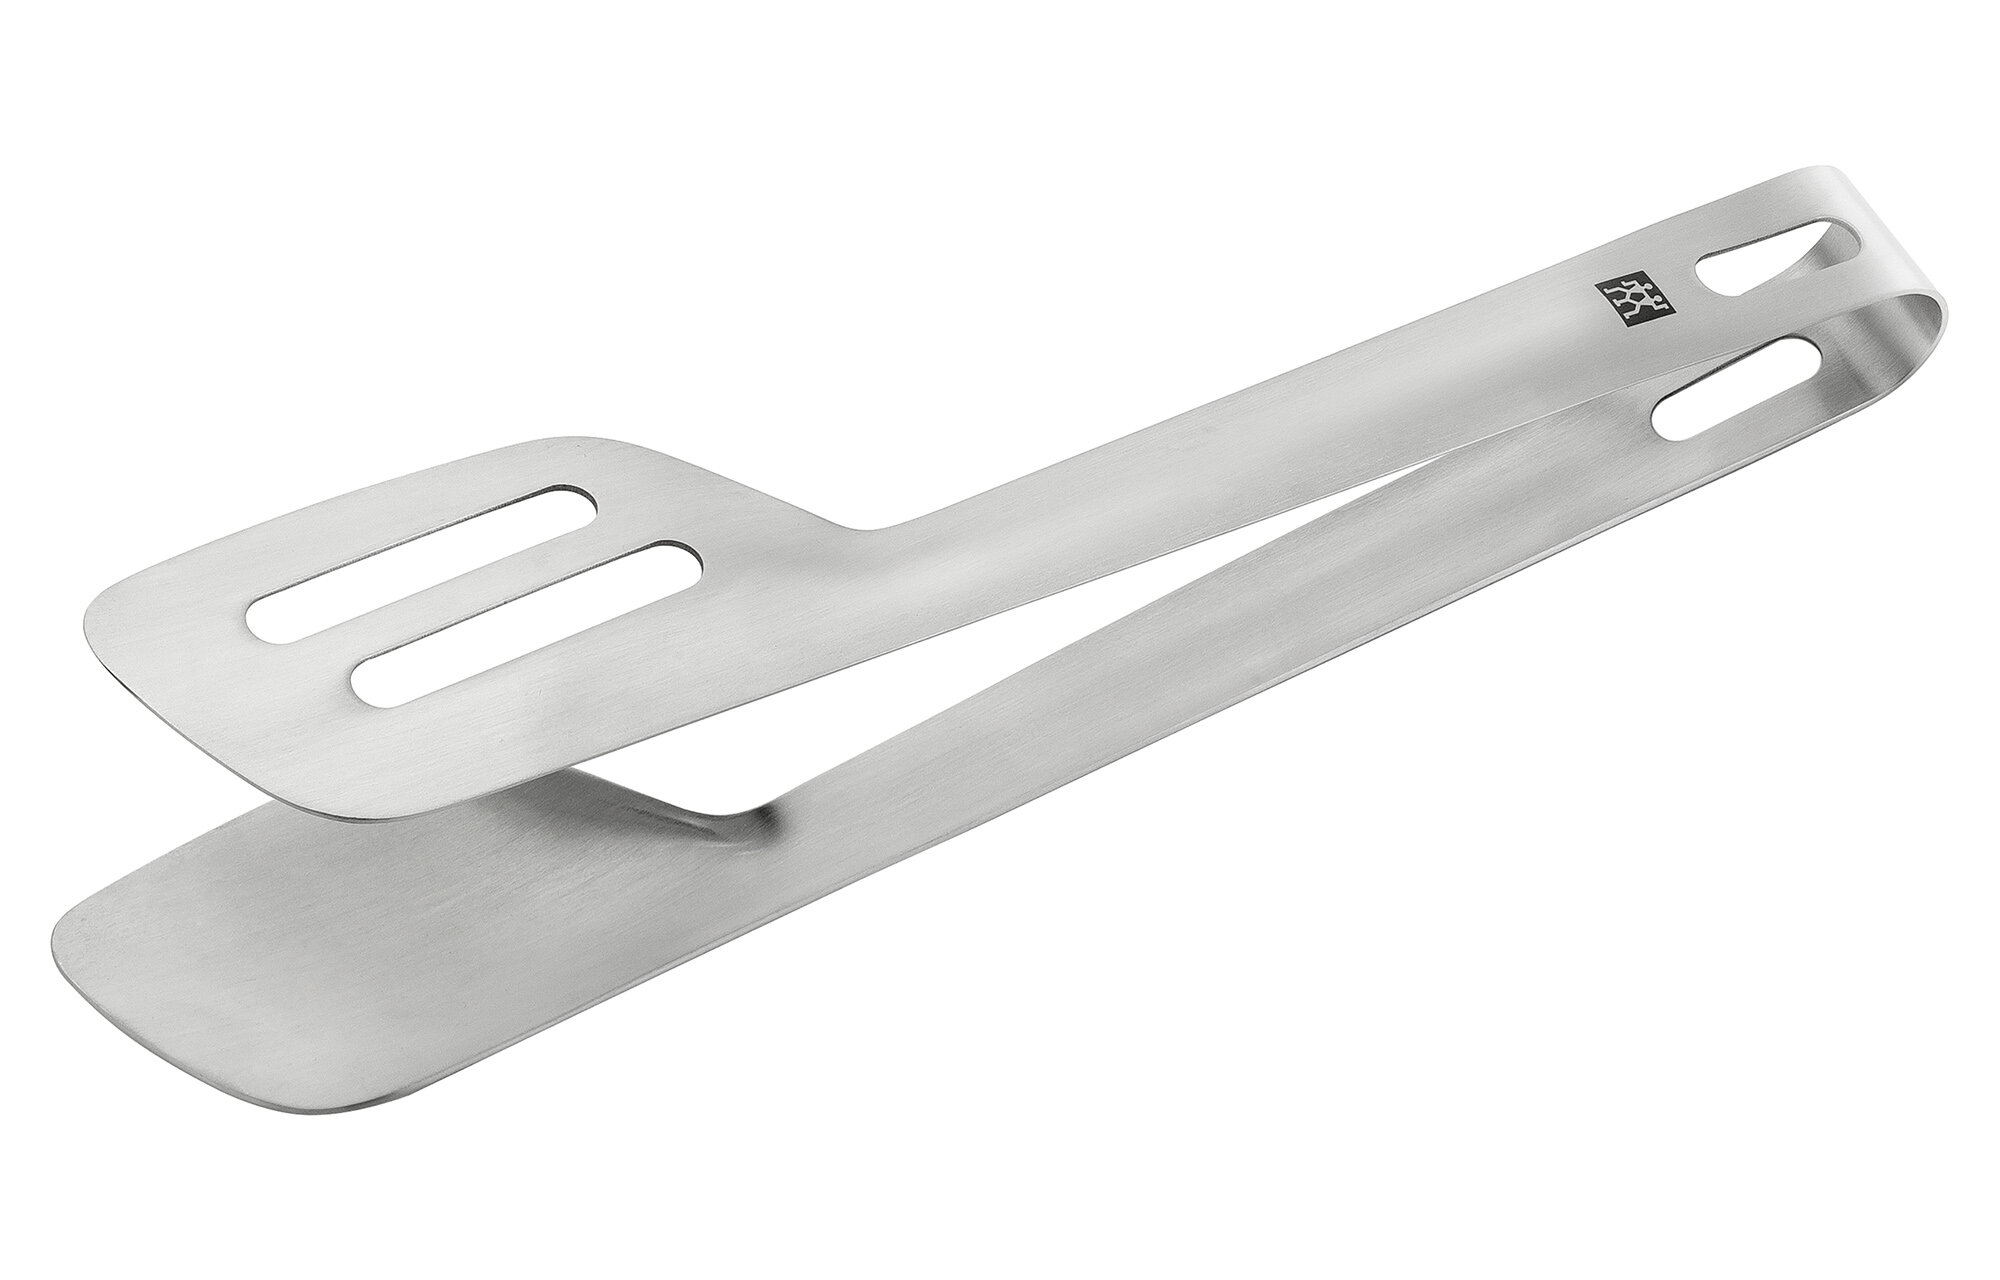 Zyliss Cook N Serve Tongs